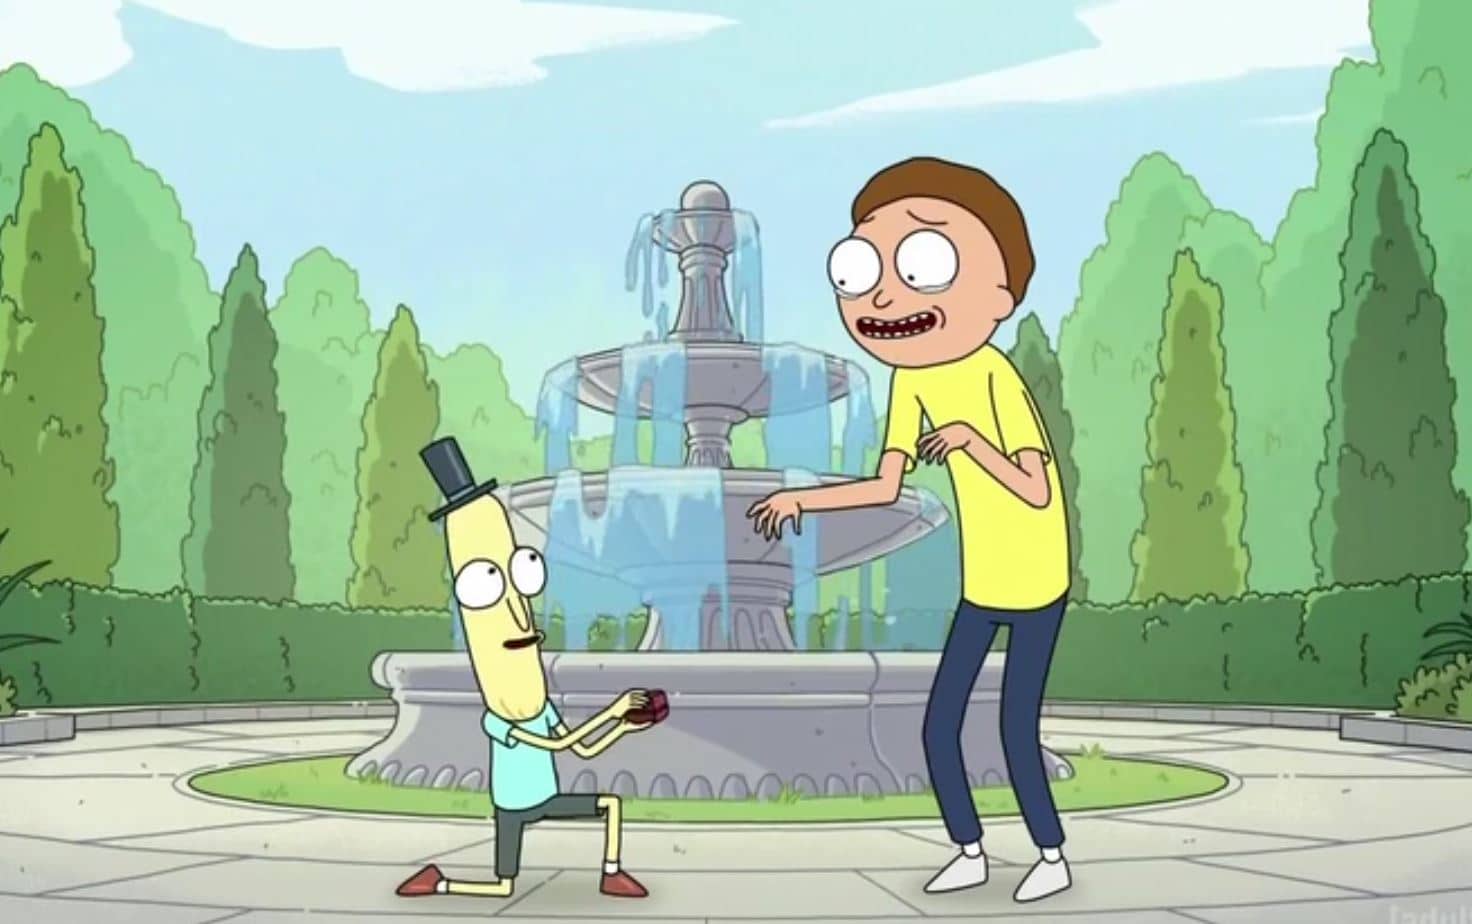 MR. POOPYBUTTHOLE RETURNS AMIDST FAN THEORIES!